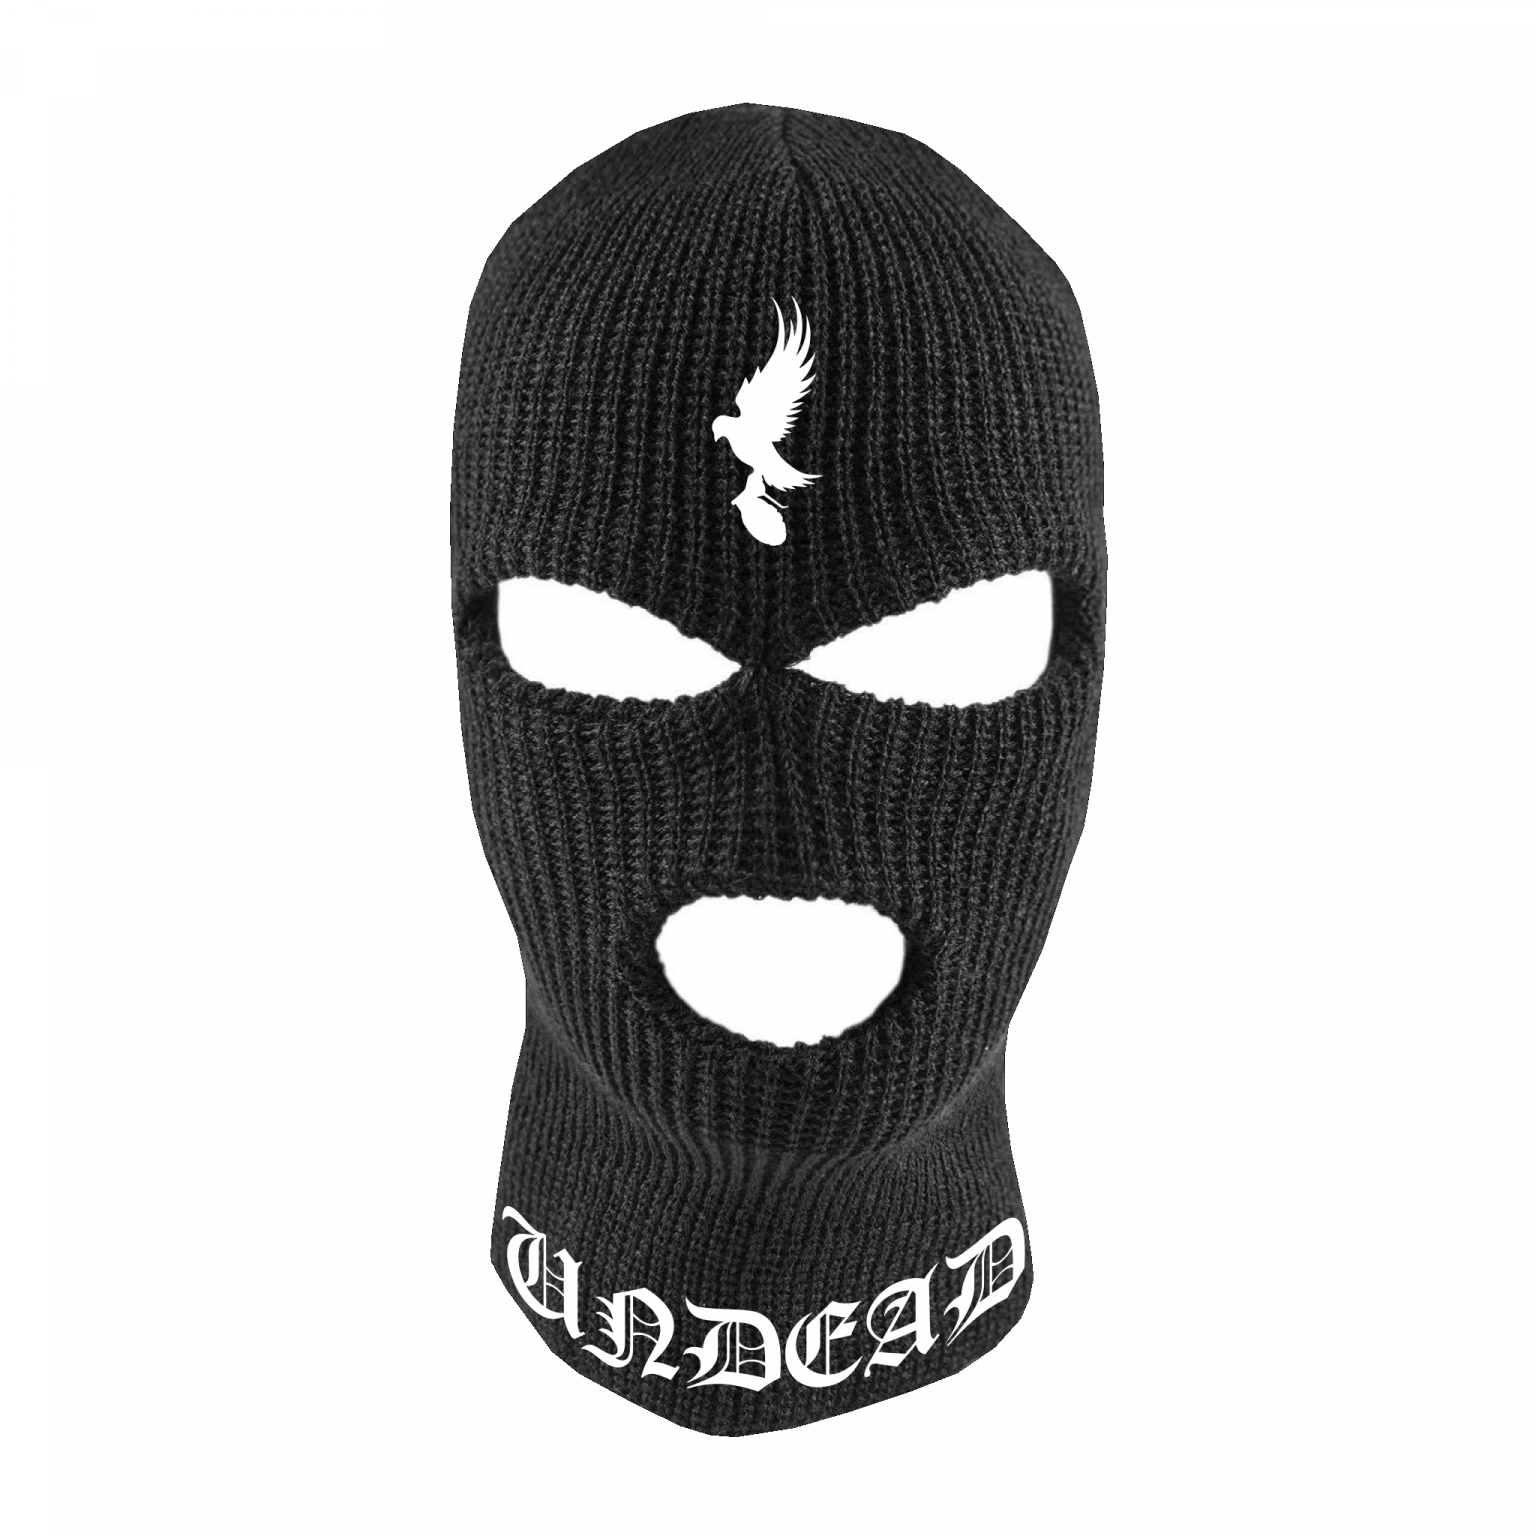 Official Hollywood Undead Ski Mask Now Available | SCNFDM